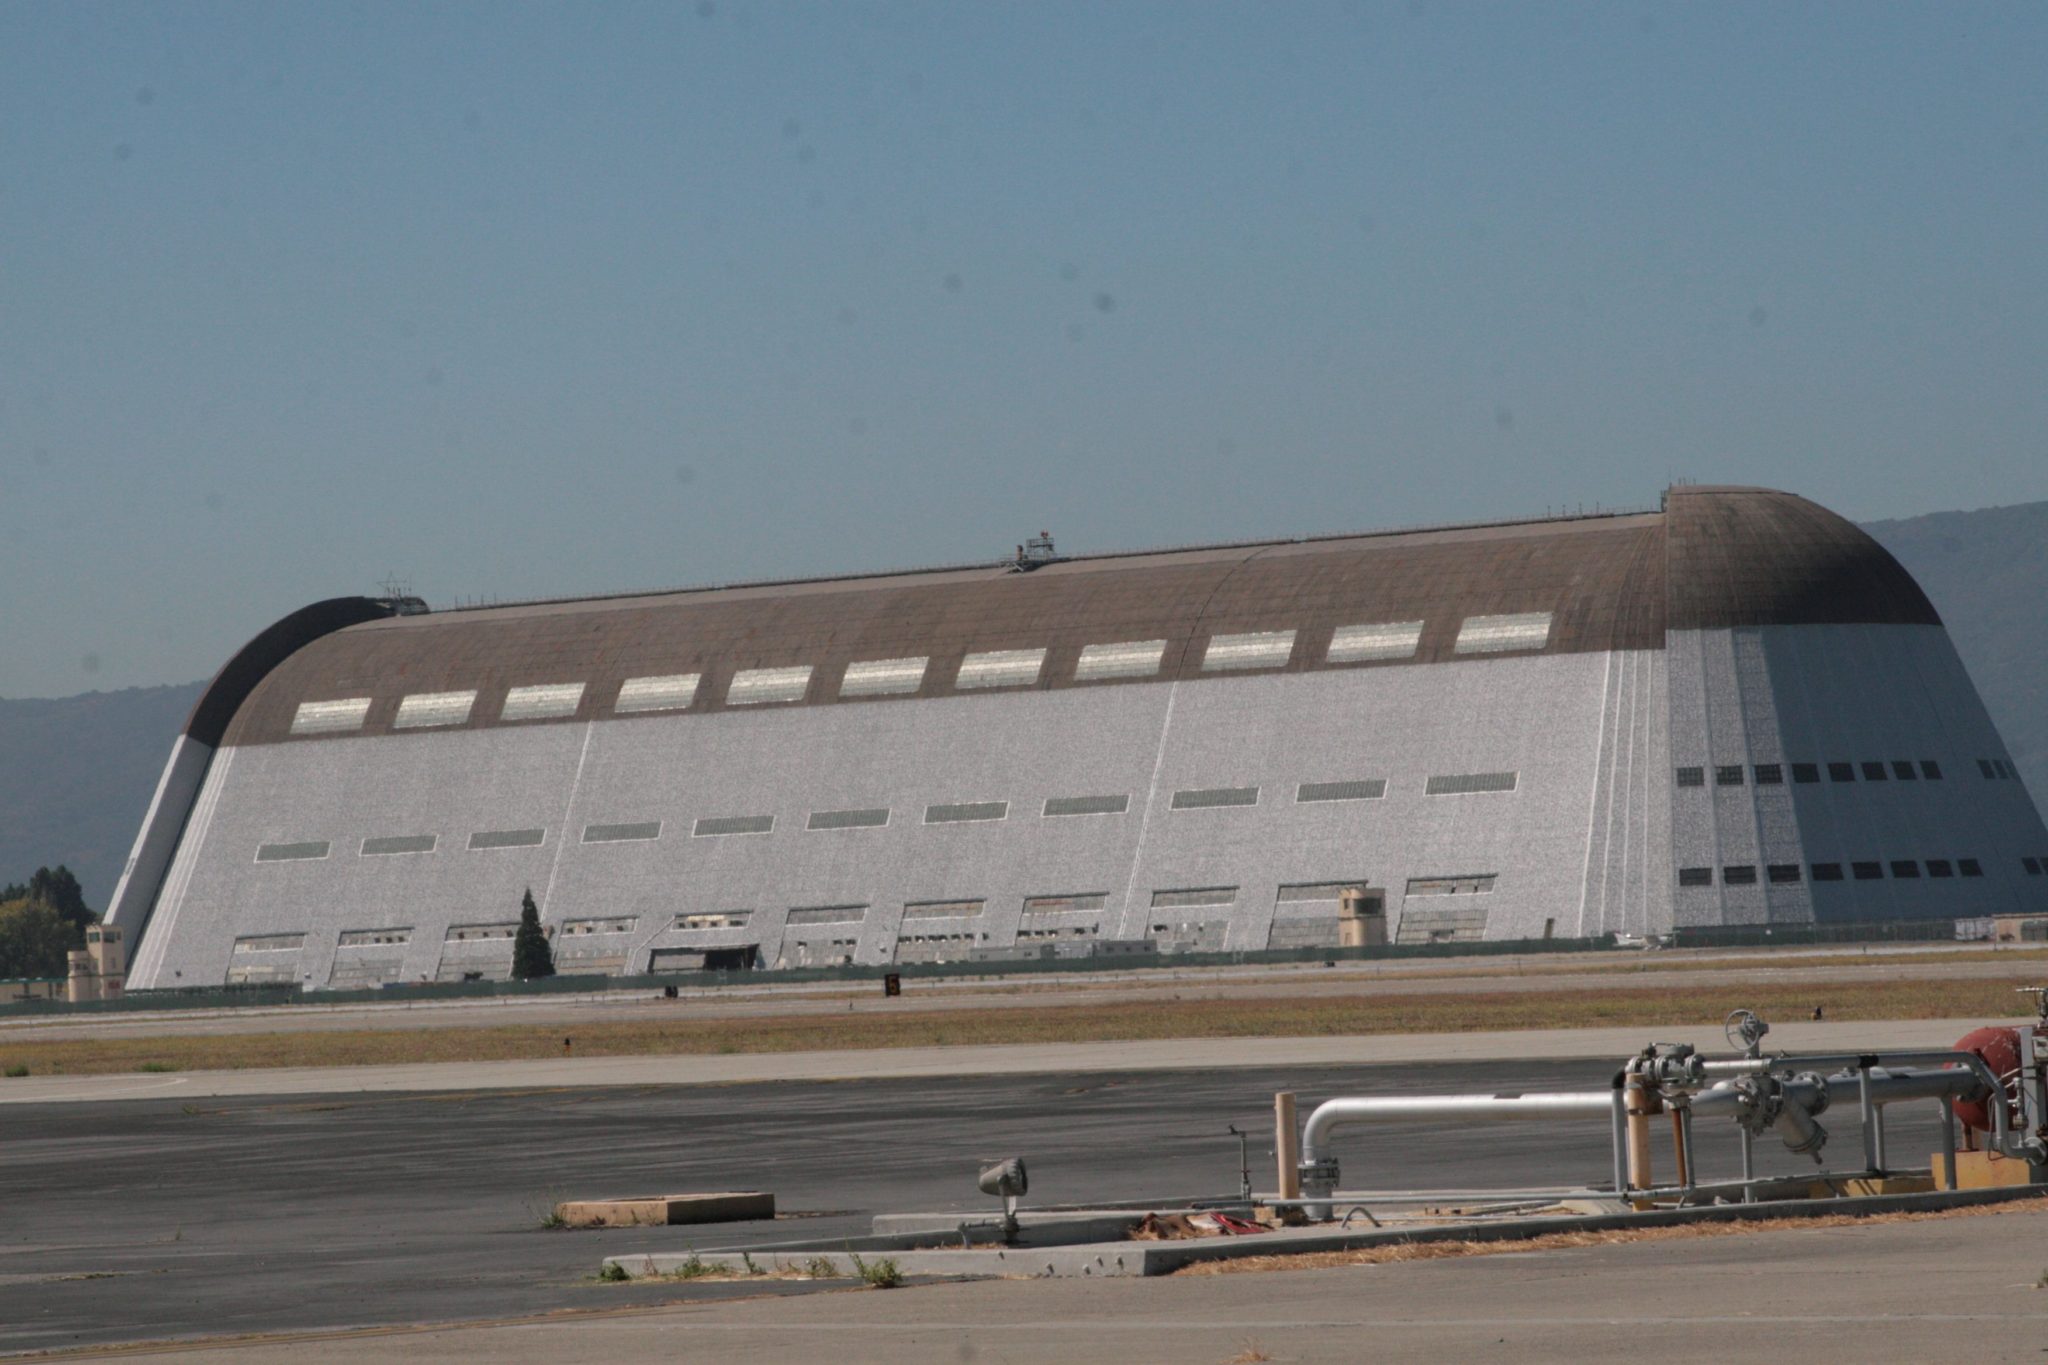 Hangar One, East from the Runway